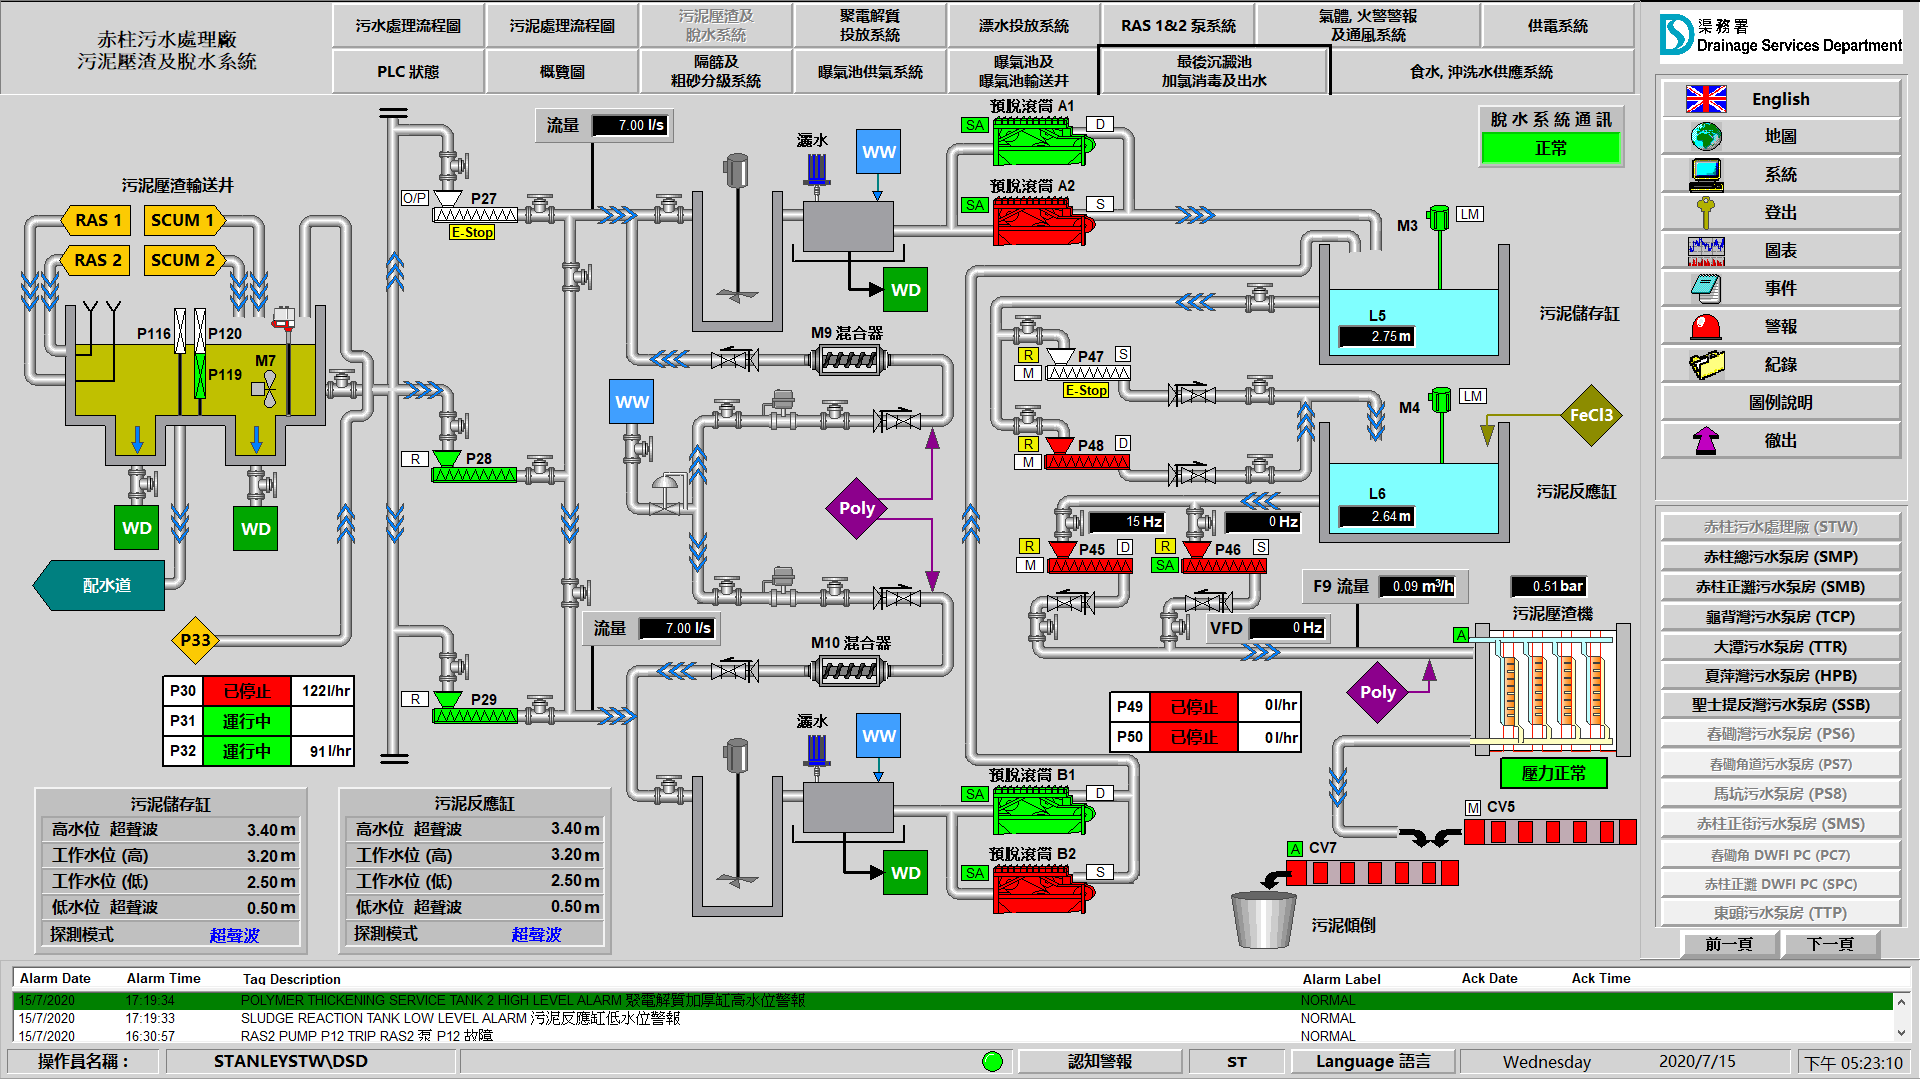 Sludge Press & Dewatering System screenshot from FactoryTalk View After Works in DSD Stanley STW Control Room